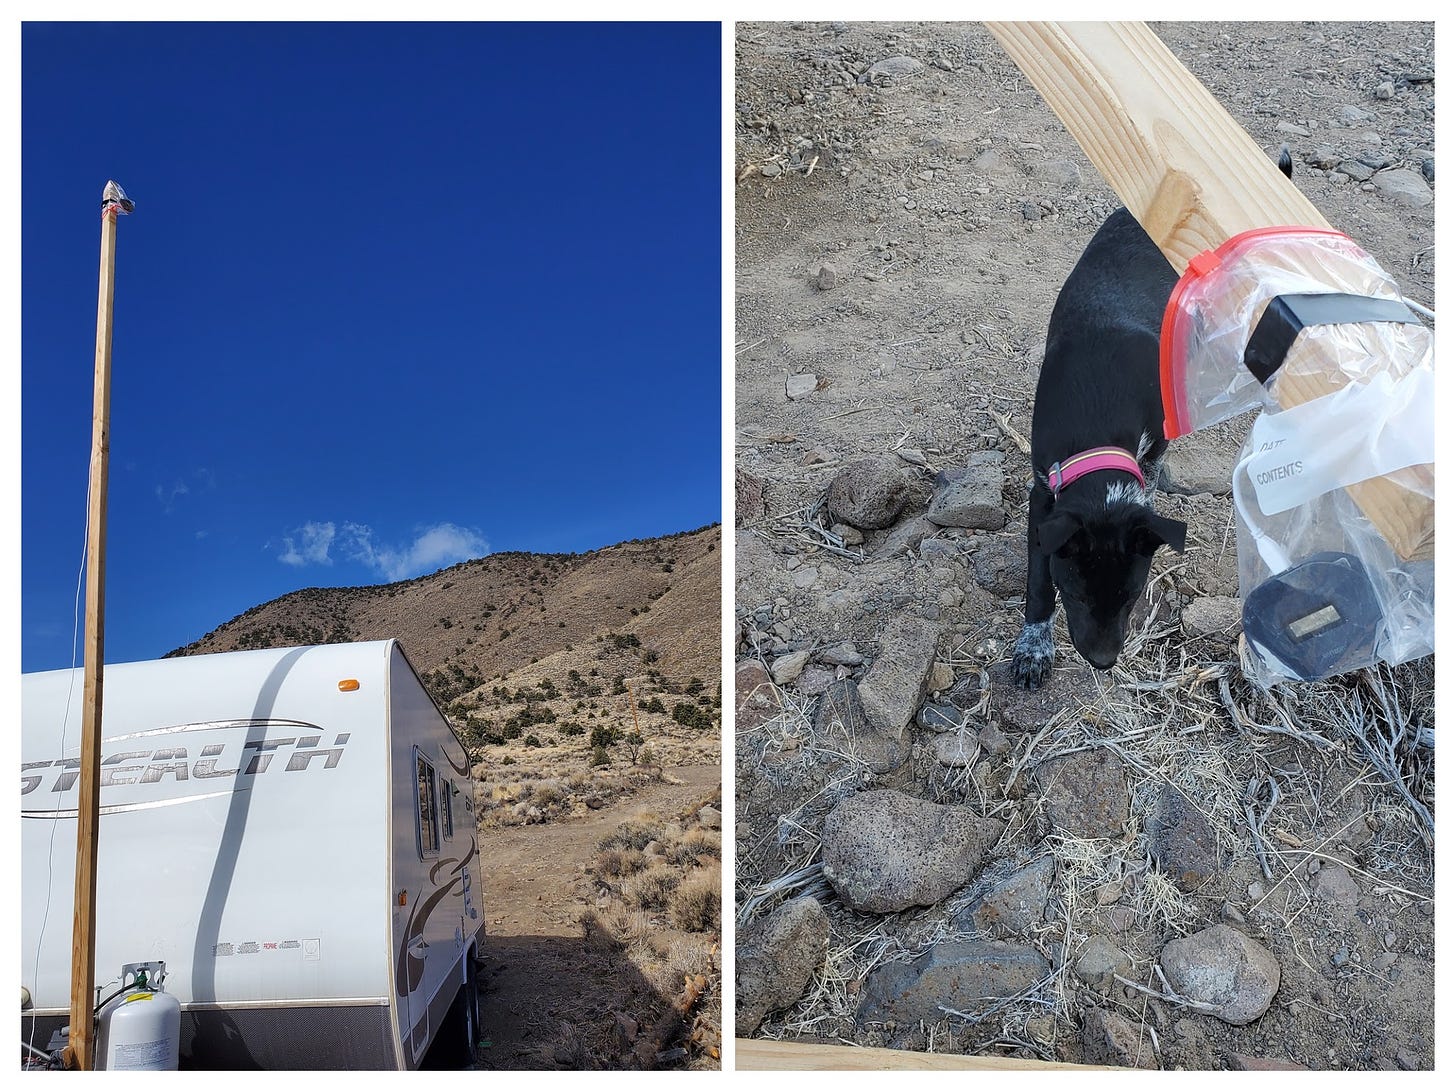 Collage photo. Image on left shows a 2"x4" wood post at the front of a travel trailer. Image at right shows a close up of the end of the post and a hotspot in a Ziploc bag duct taped to end. A black puppy is nearby checking things out.